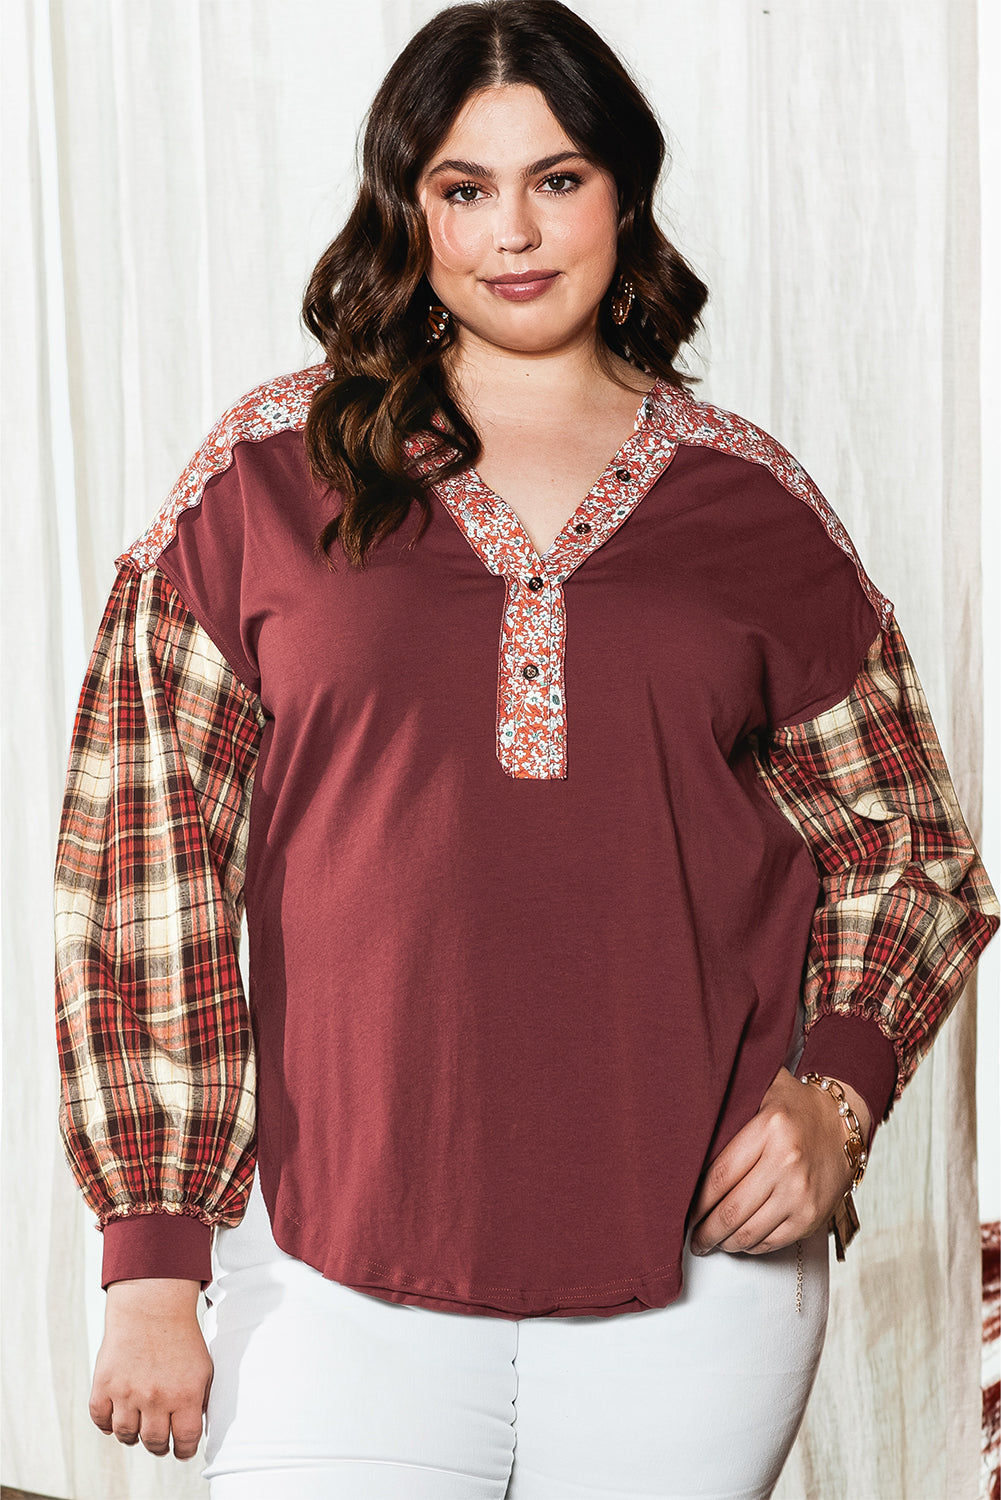 Red Dahlia Mixed Print Half Buttons Plus Size Pullover Top